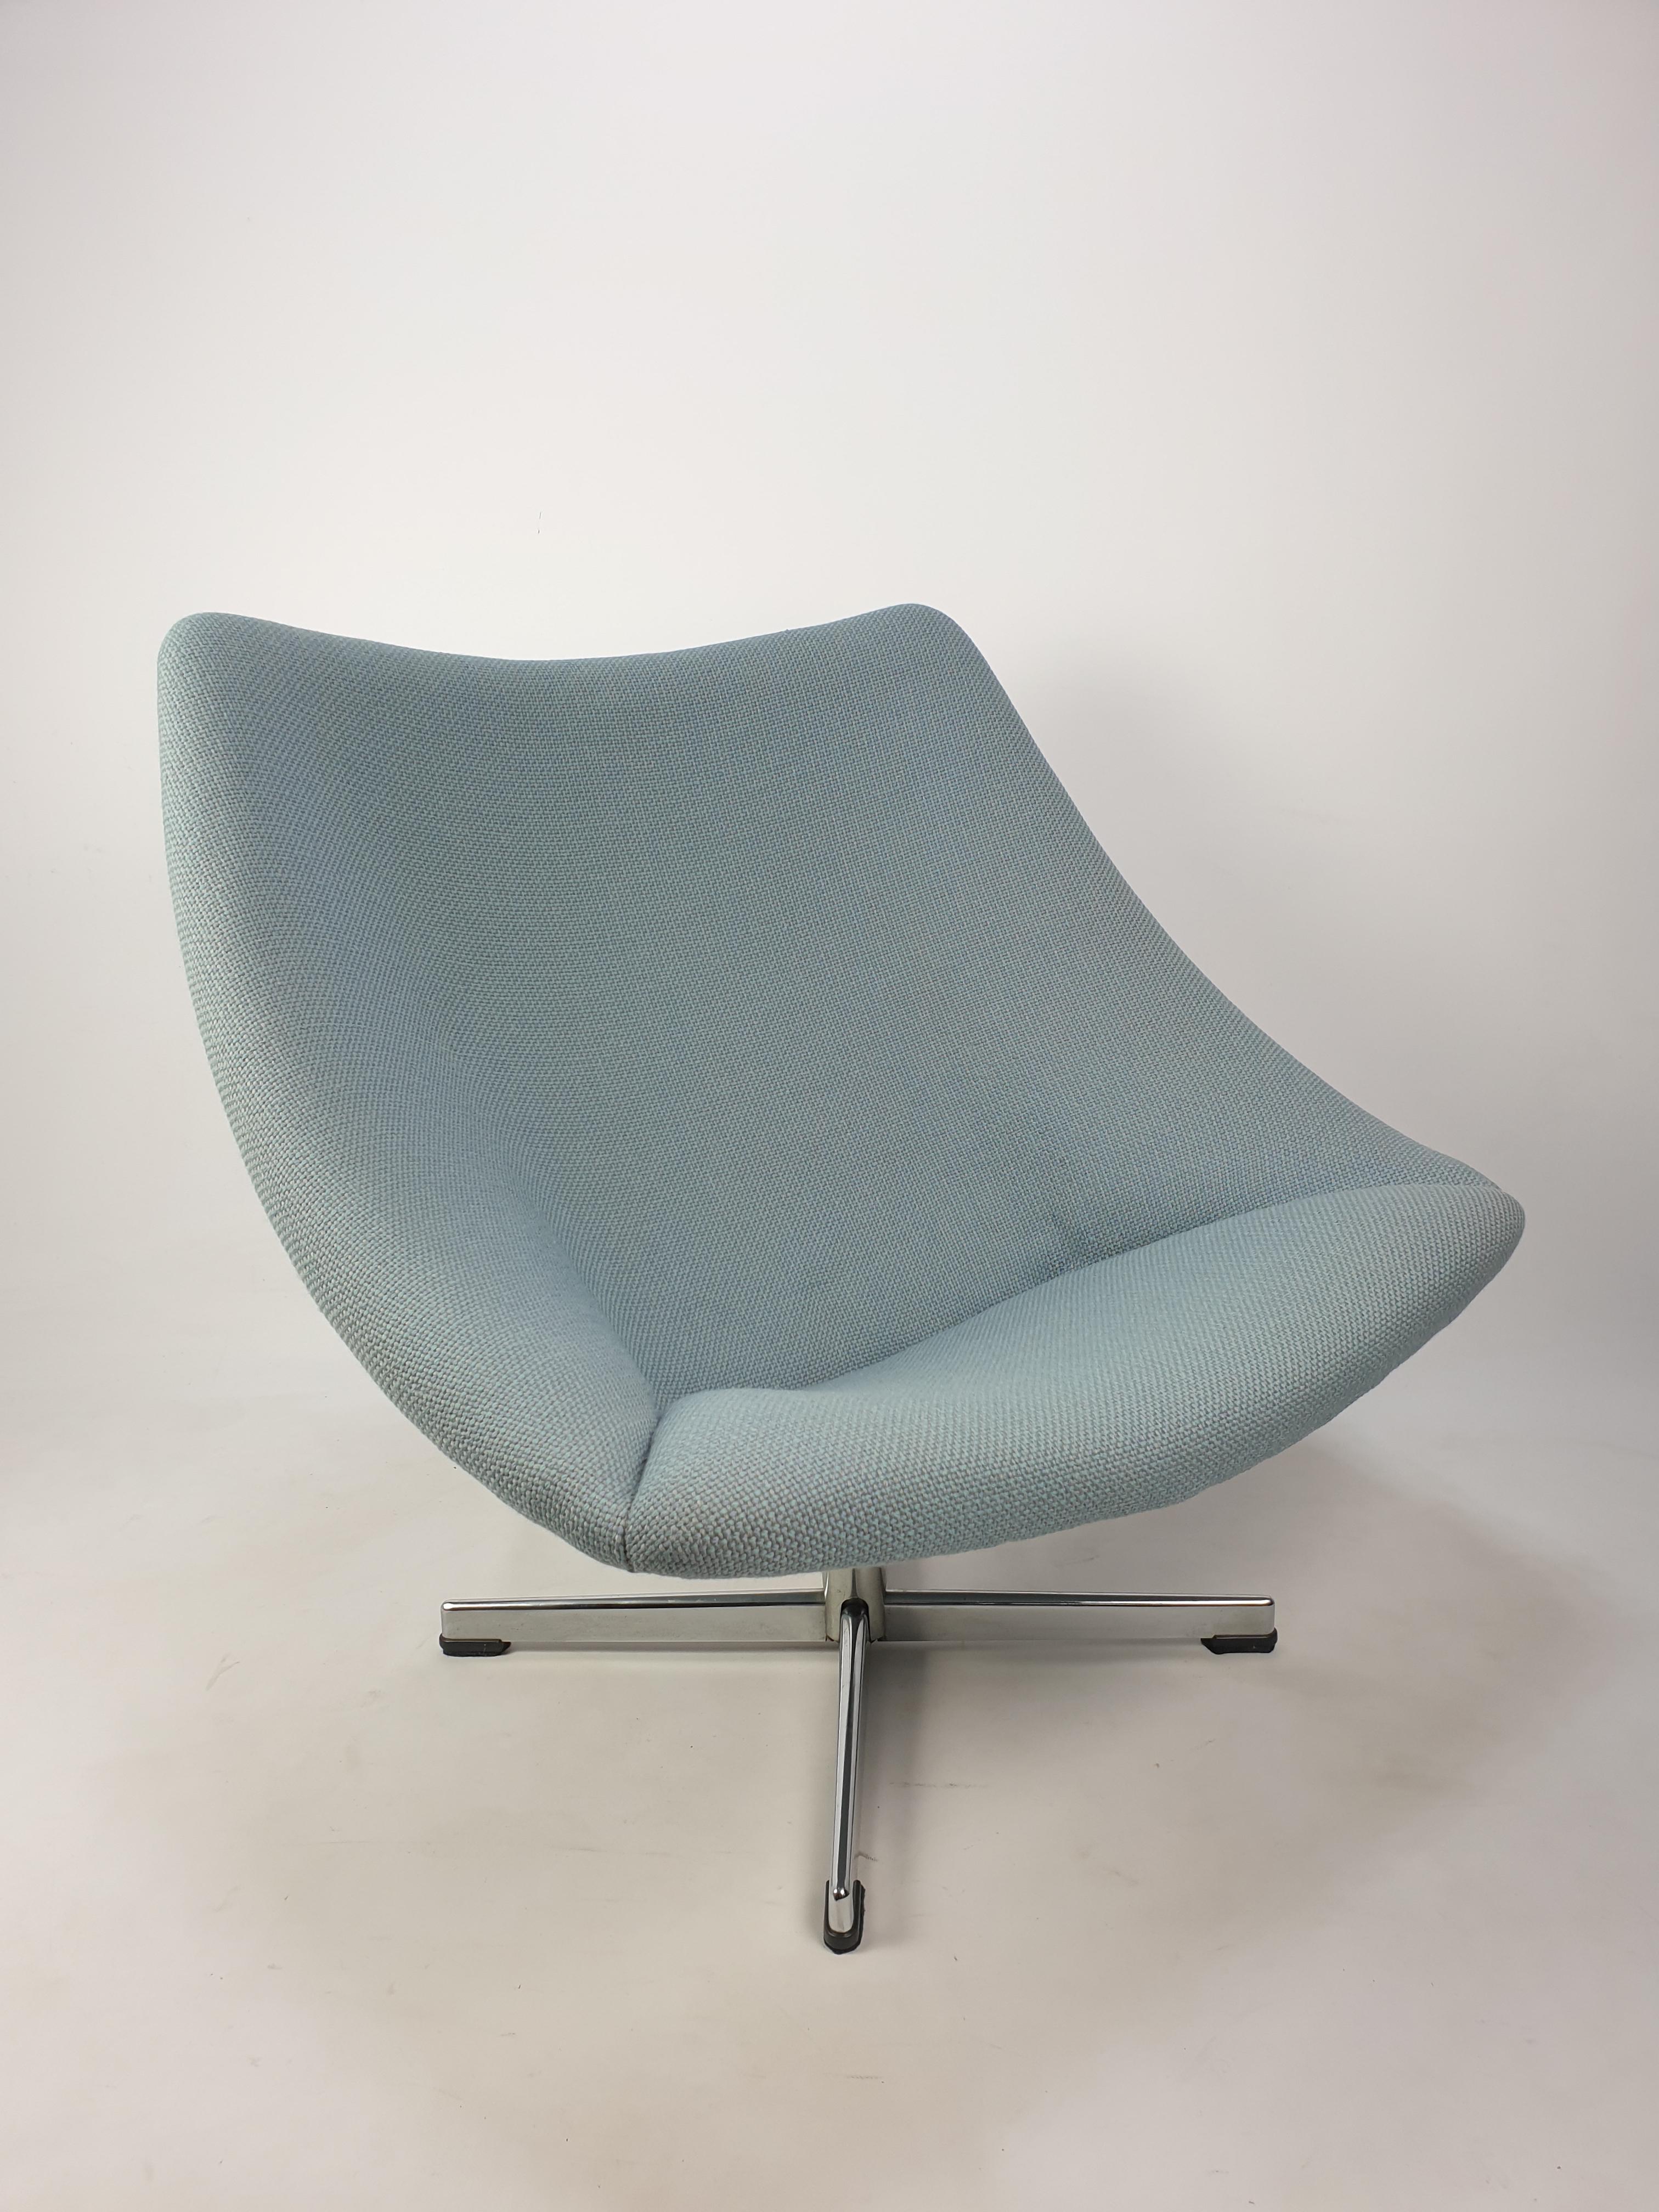 The famous Oyster chair by Pierre Paulin, the big model. This very comfortable model is a very rare version, with a turnable cross base. Designed in the 60's. The structure is in very good condition. It has been reupholstered in the 80's with